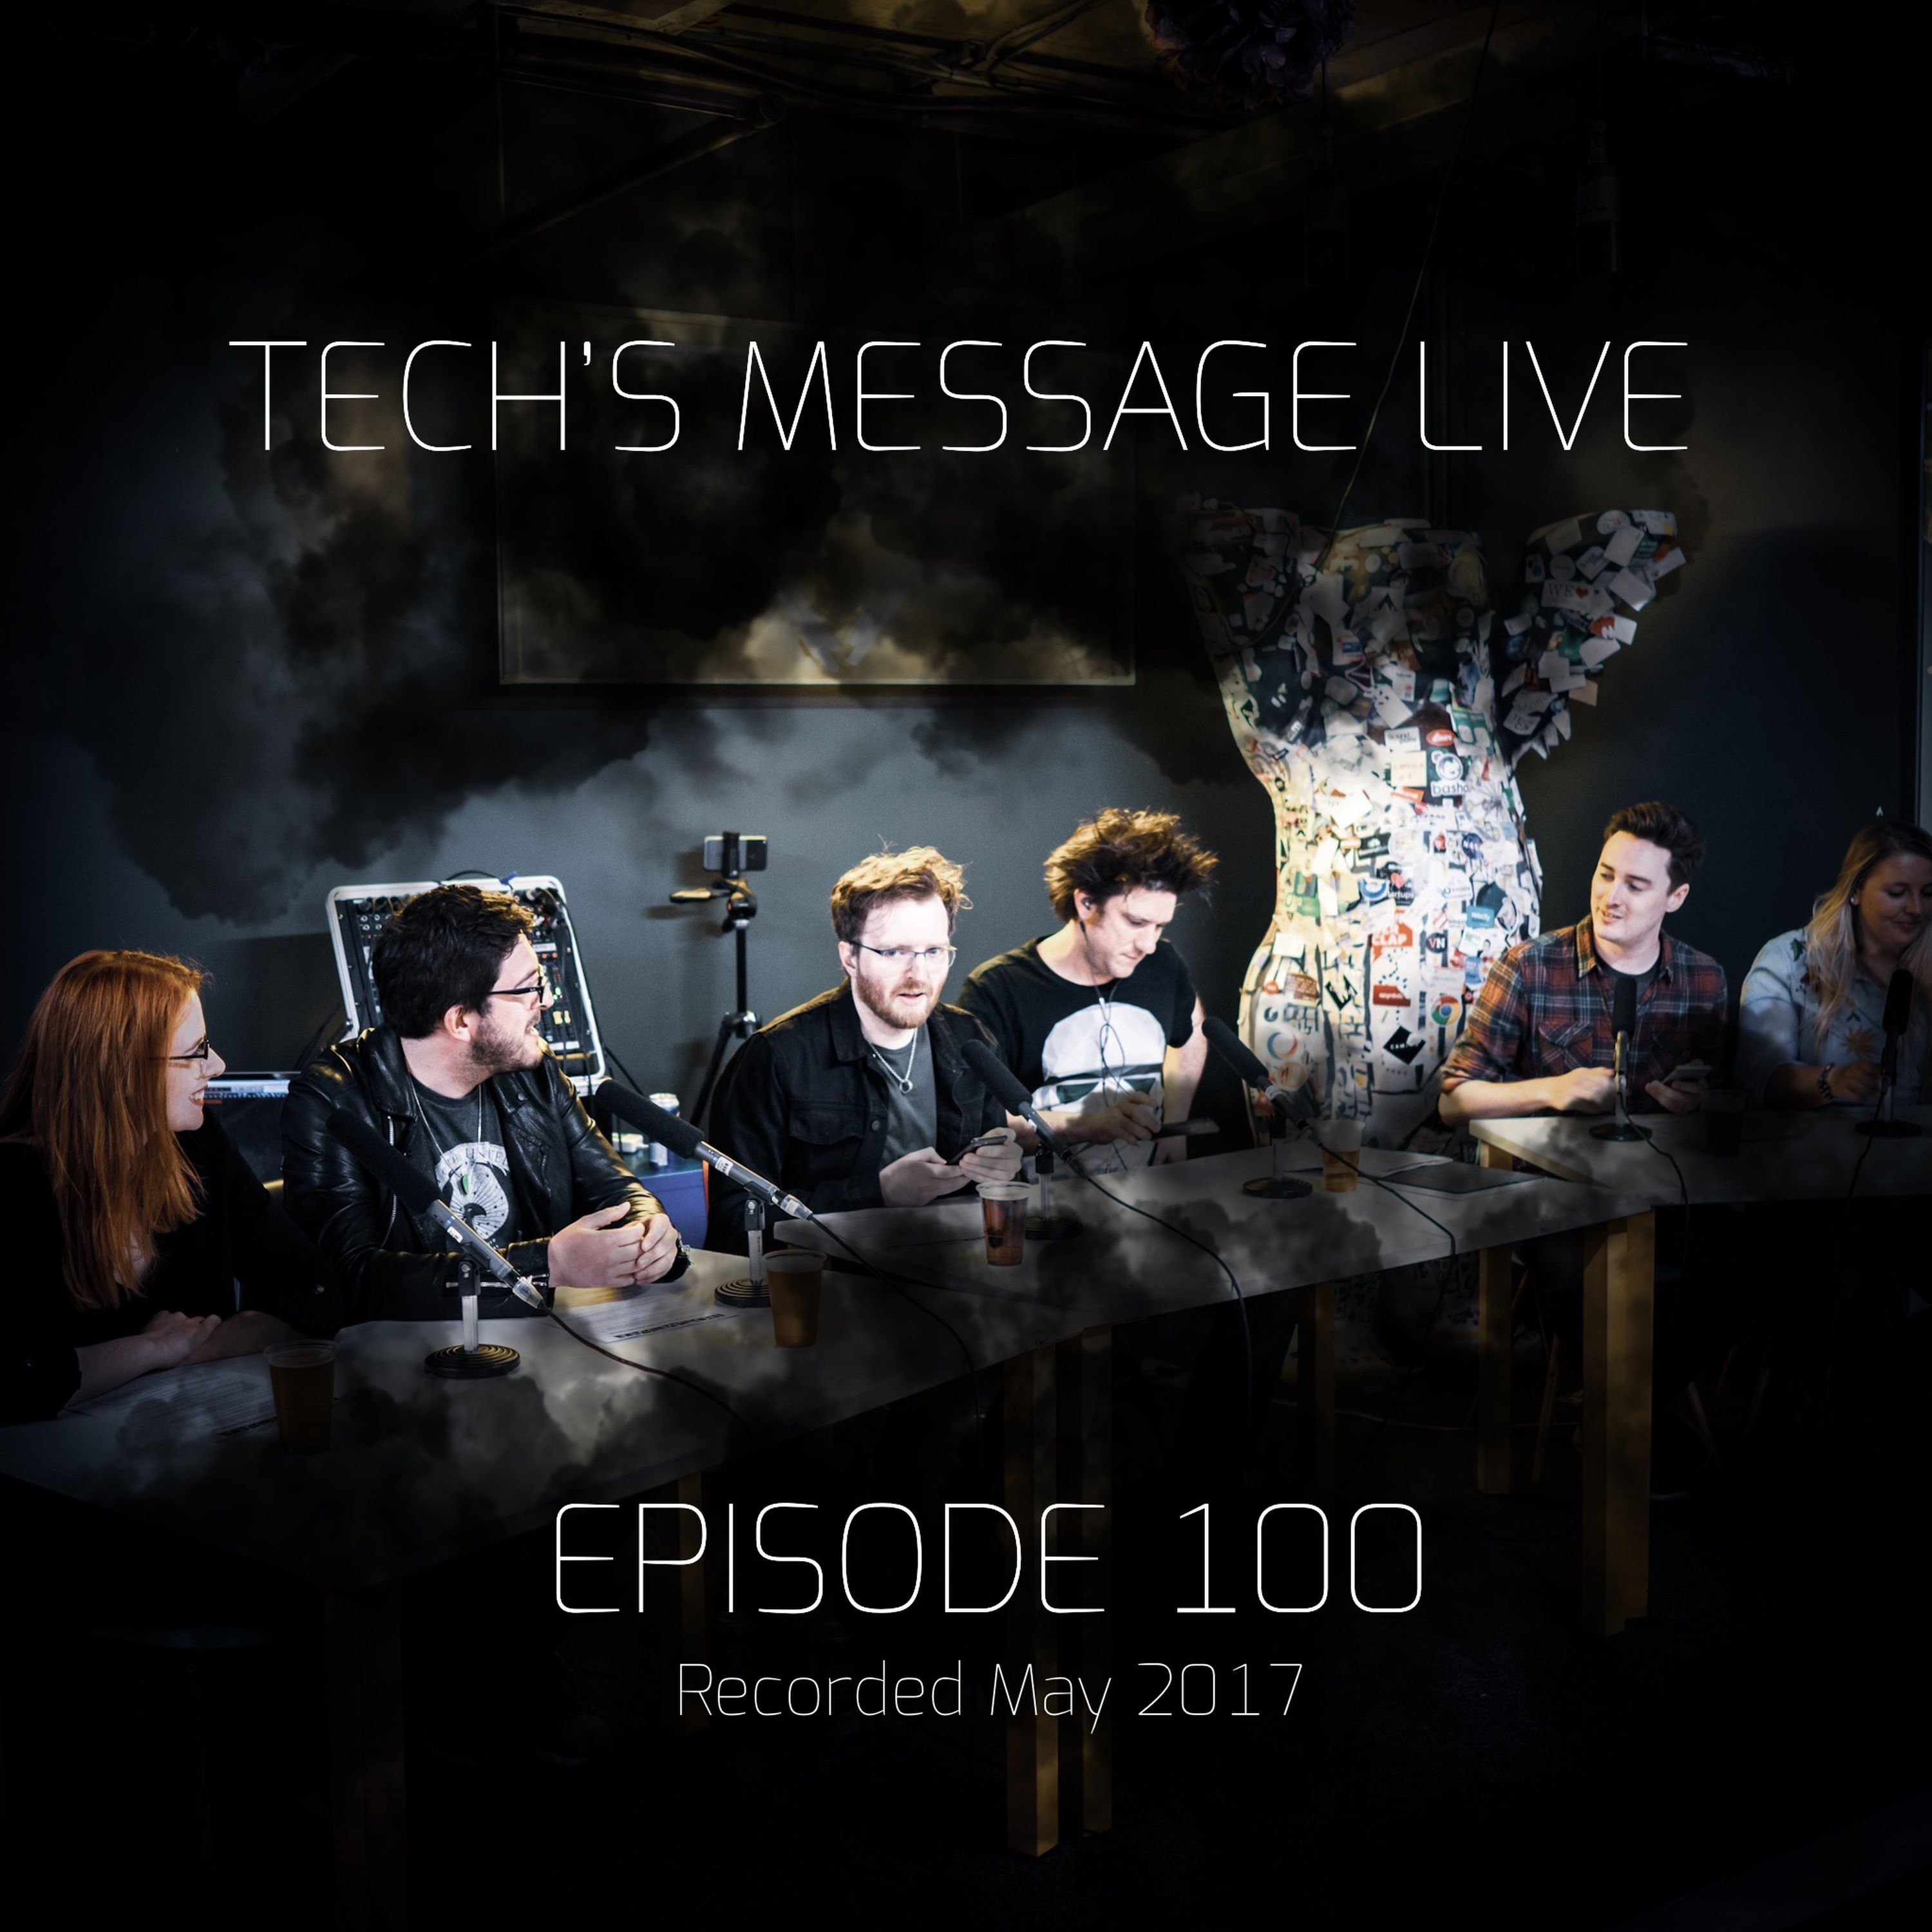 Tech’s Message Episode 100 LIVE from London!